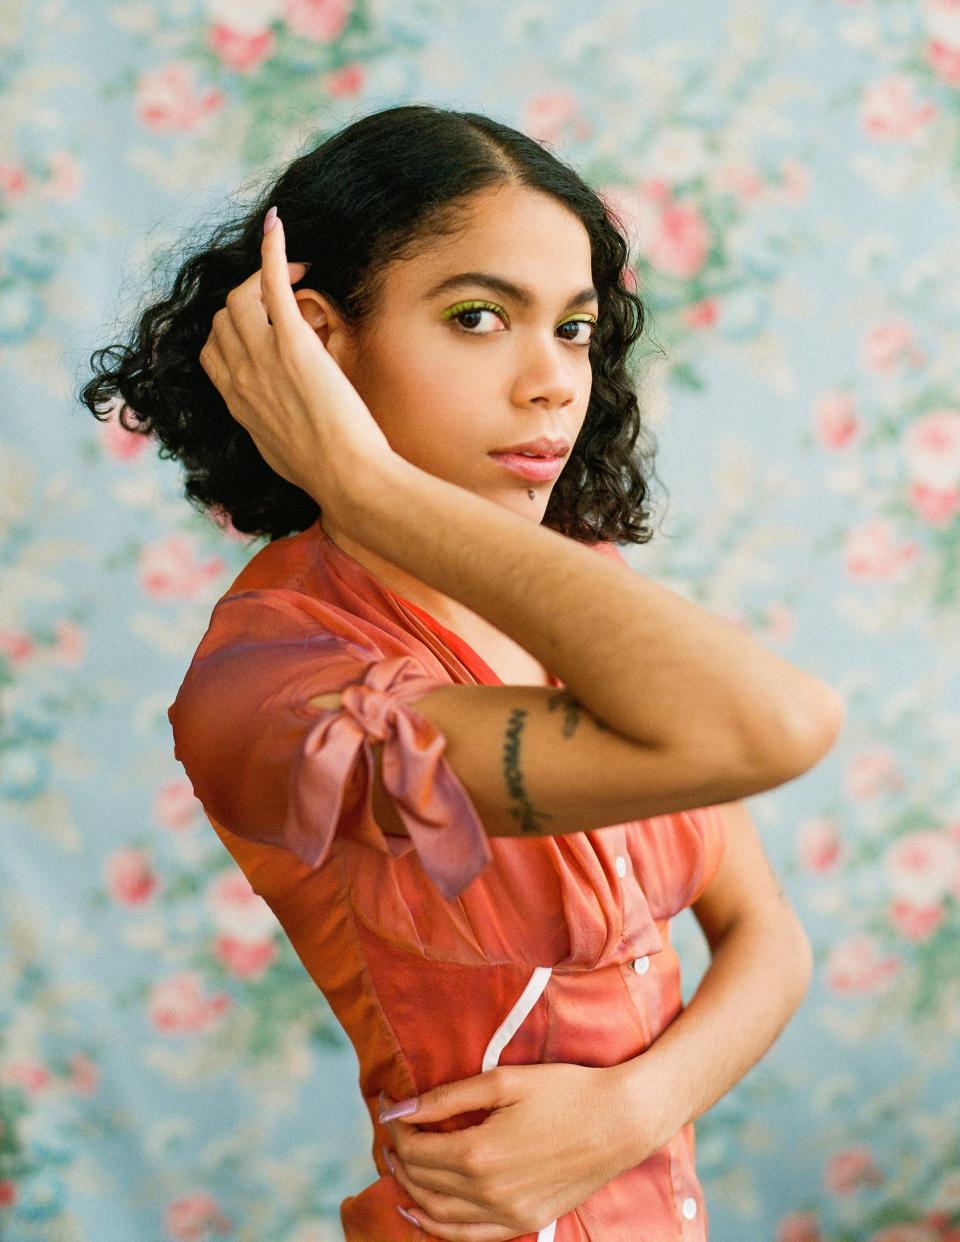 Seven people showed off their arm hair in striking portraits and opened up about their relationships with it in this portrait series for Allure. Their stories show our relationships with our hair are both culturally influenced and intensely personal.